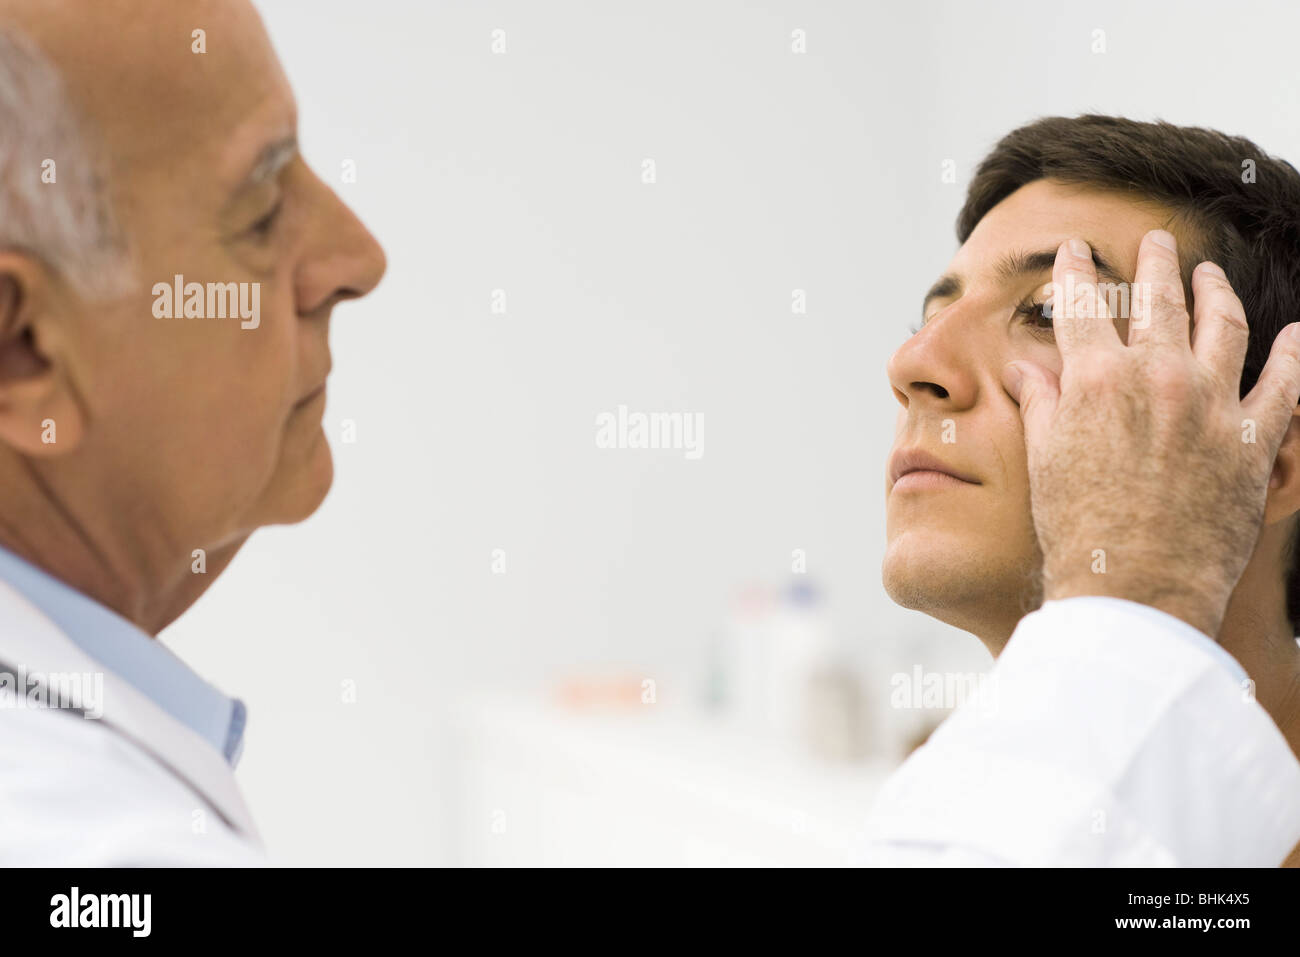 Doctor checking patient's ocular health Stock Photo